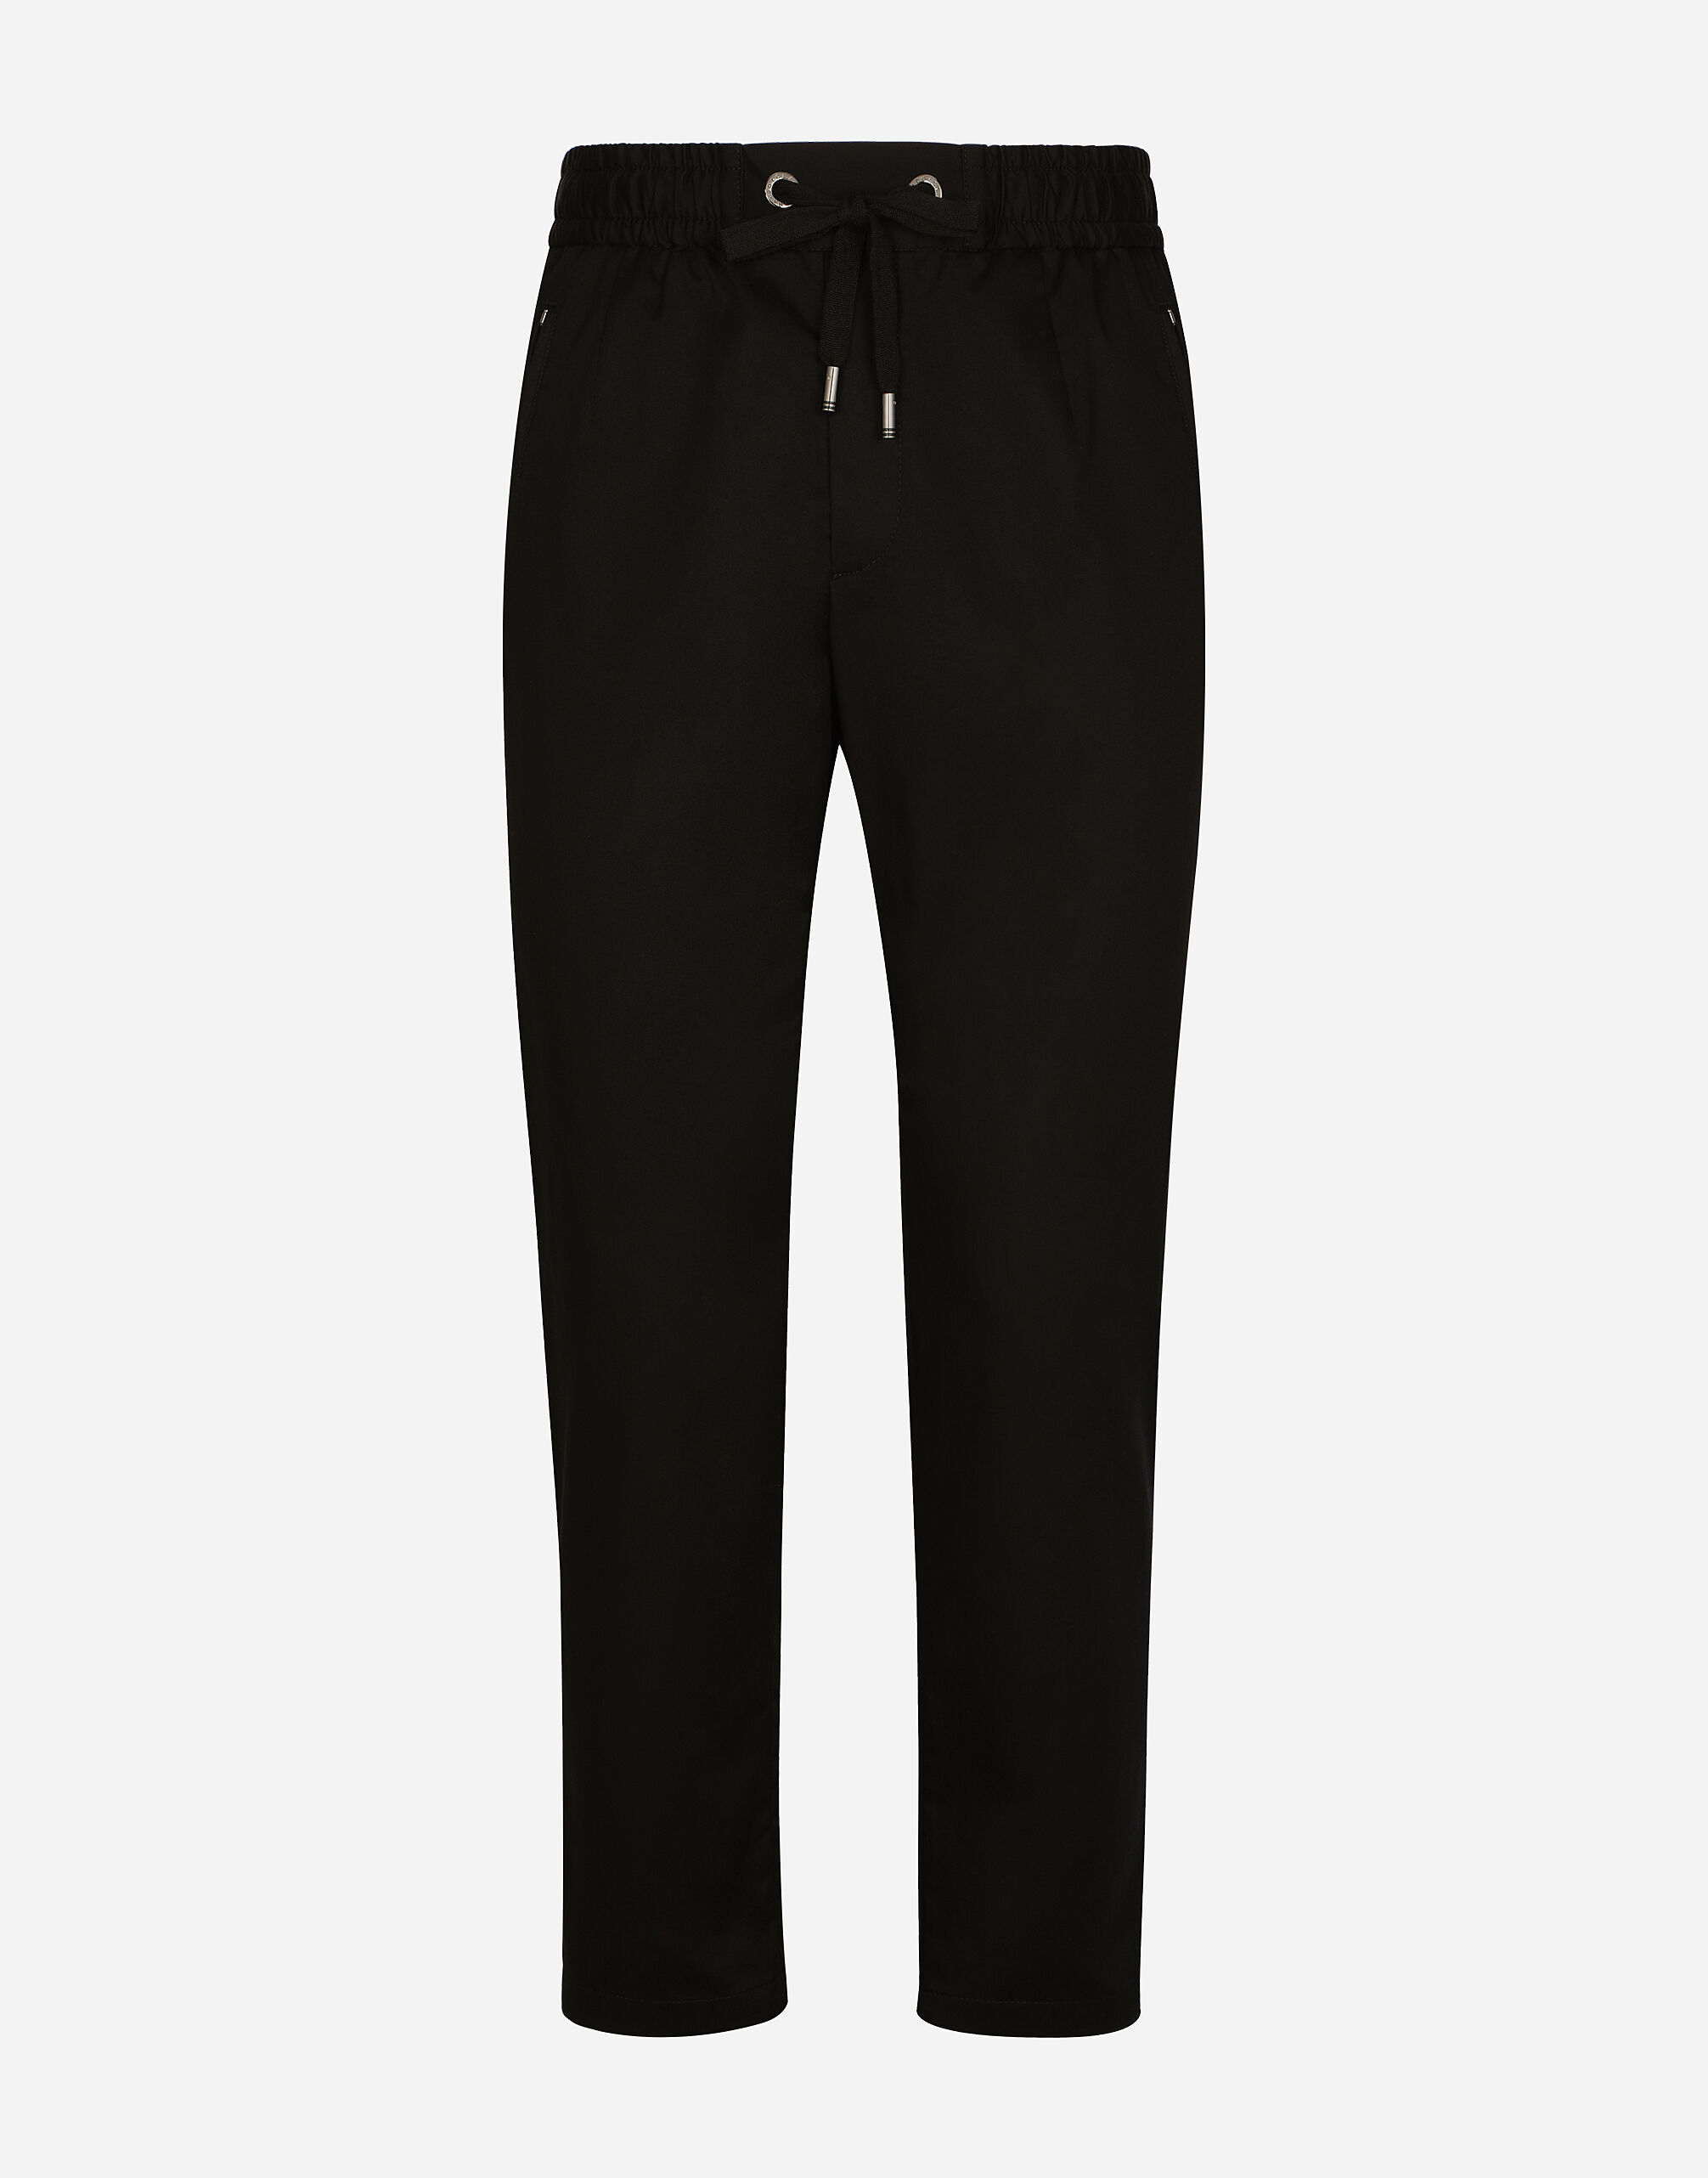 Dolce & Gabbana Stretch cotton jogging pants with tag Black G2PS2THJMOW